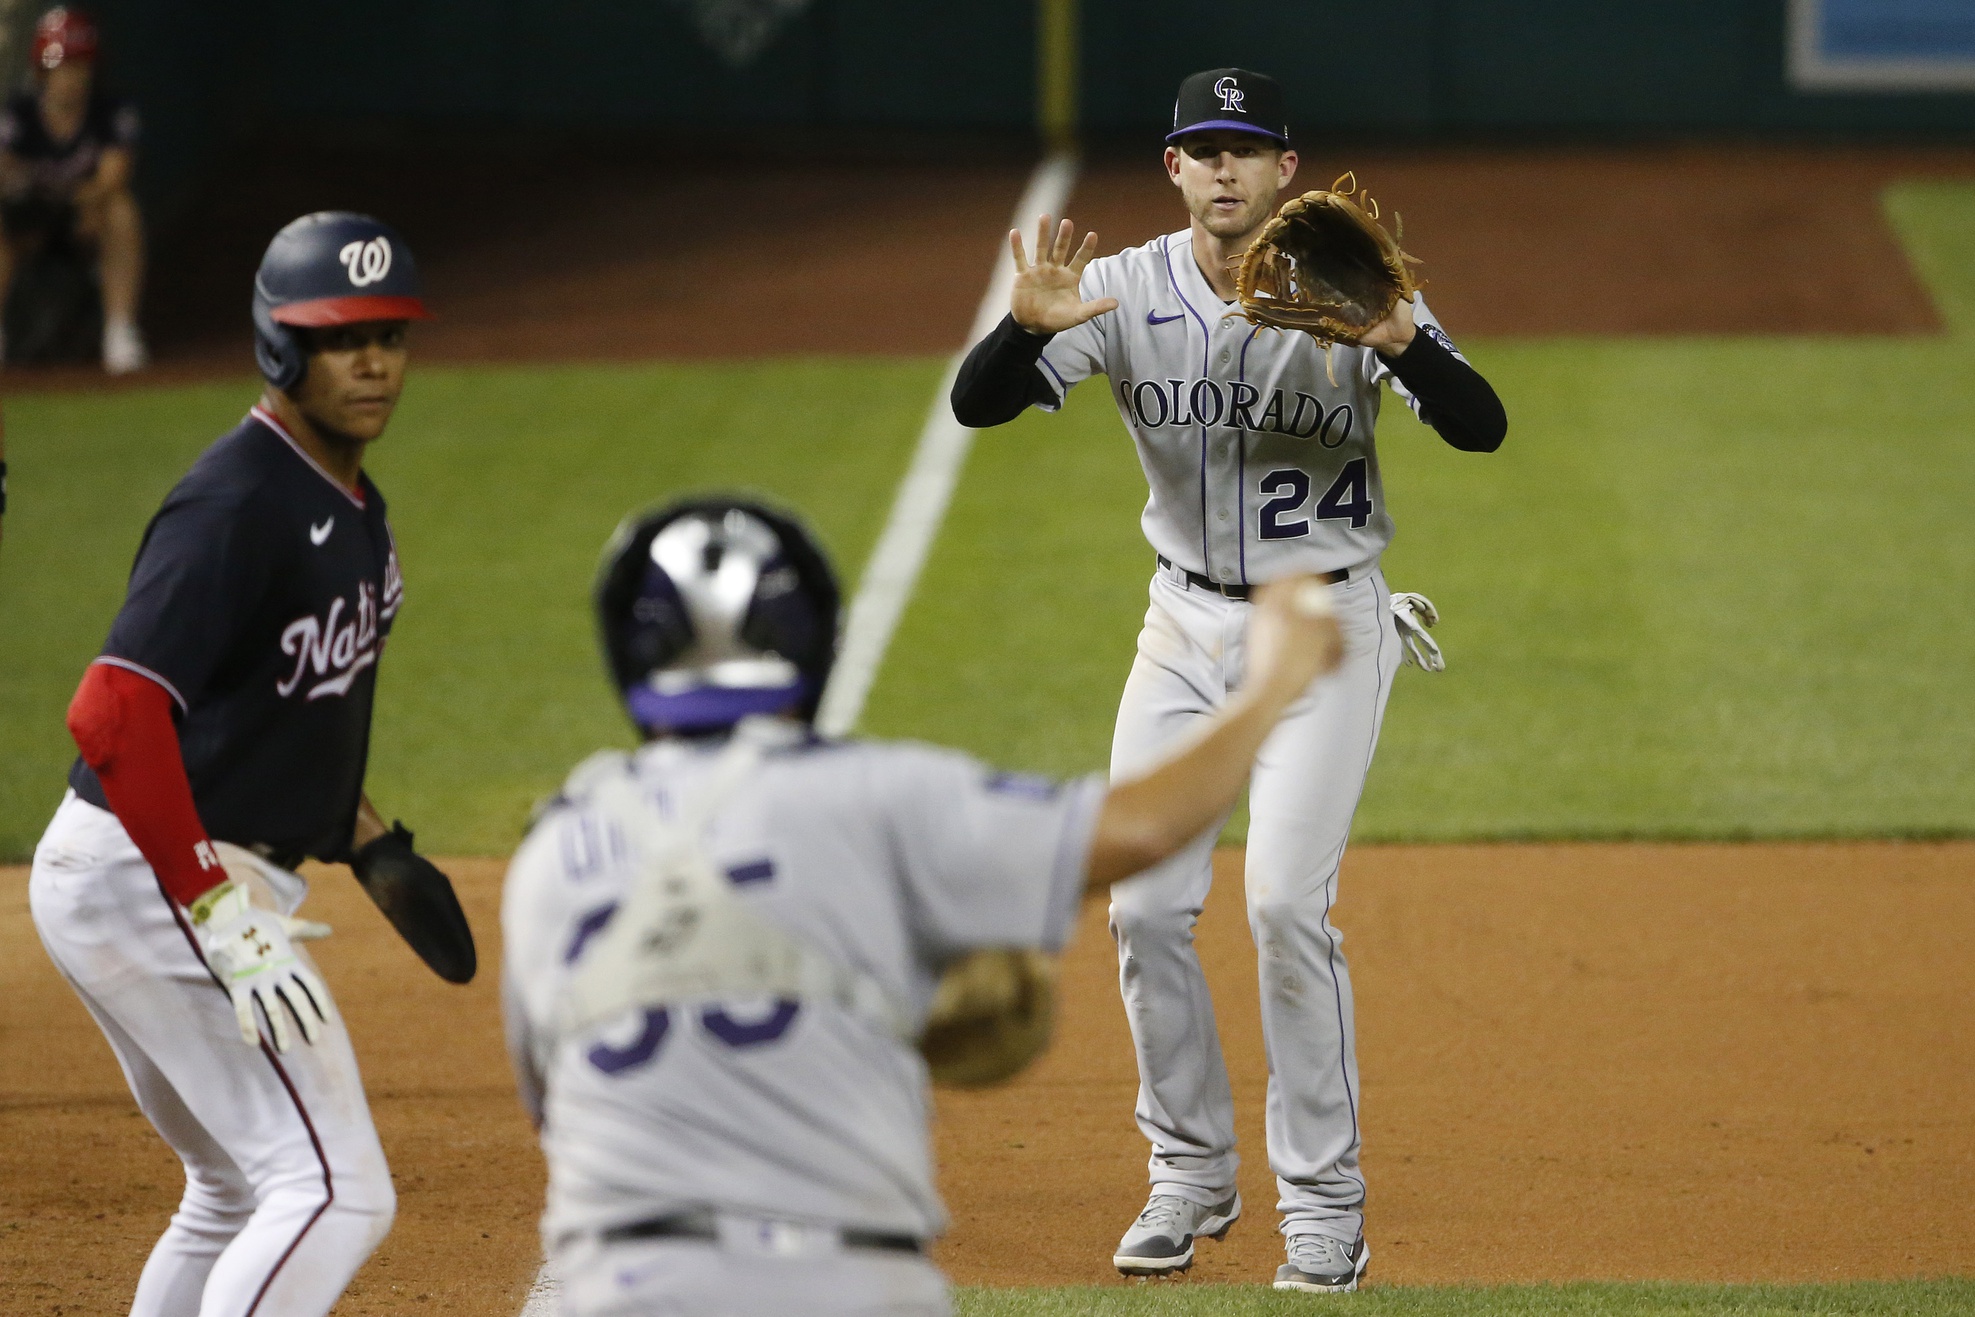 Colorado Rockies pitchers might have a problem with the new baseball -  Beyond the Box Score